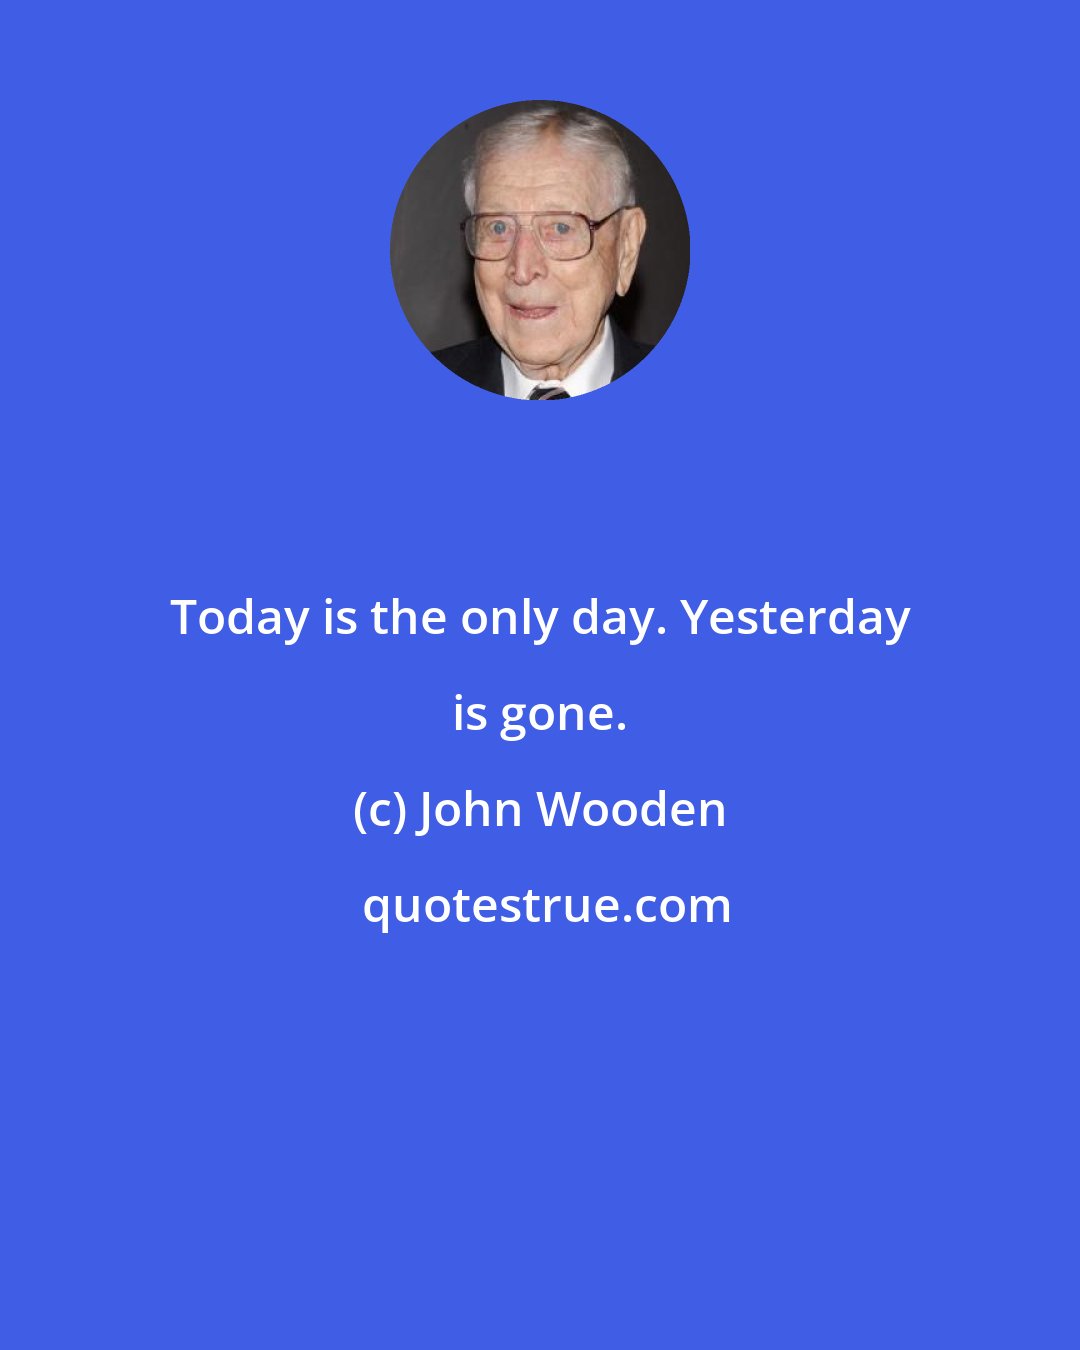 John Wooden: Today is the only day. Yesterday is gone.